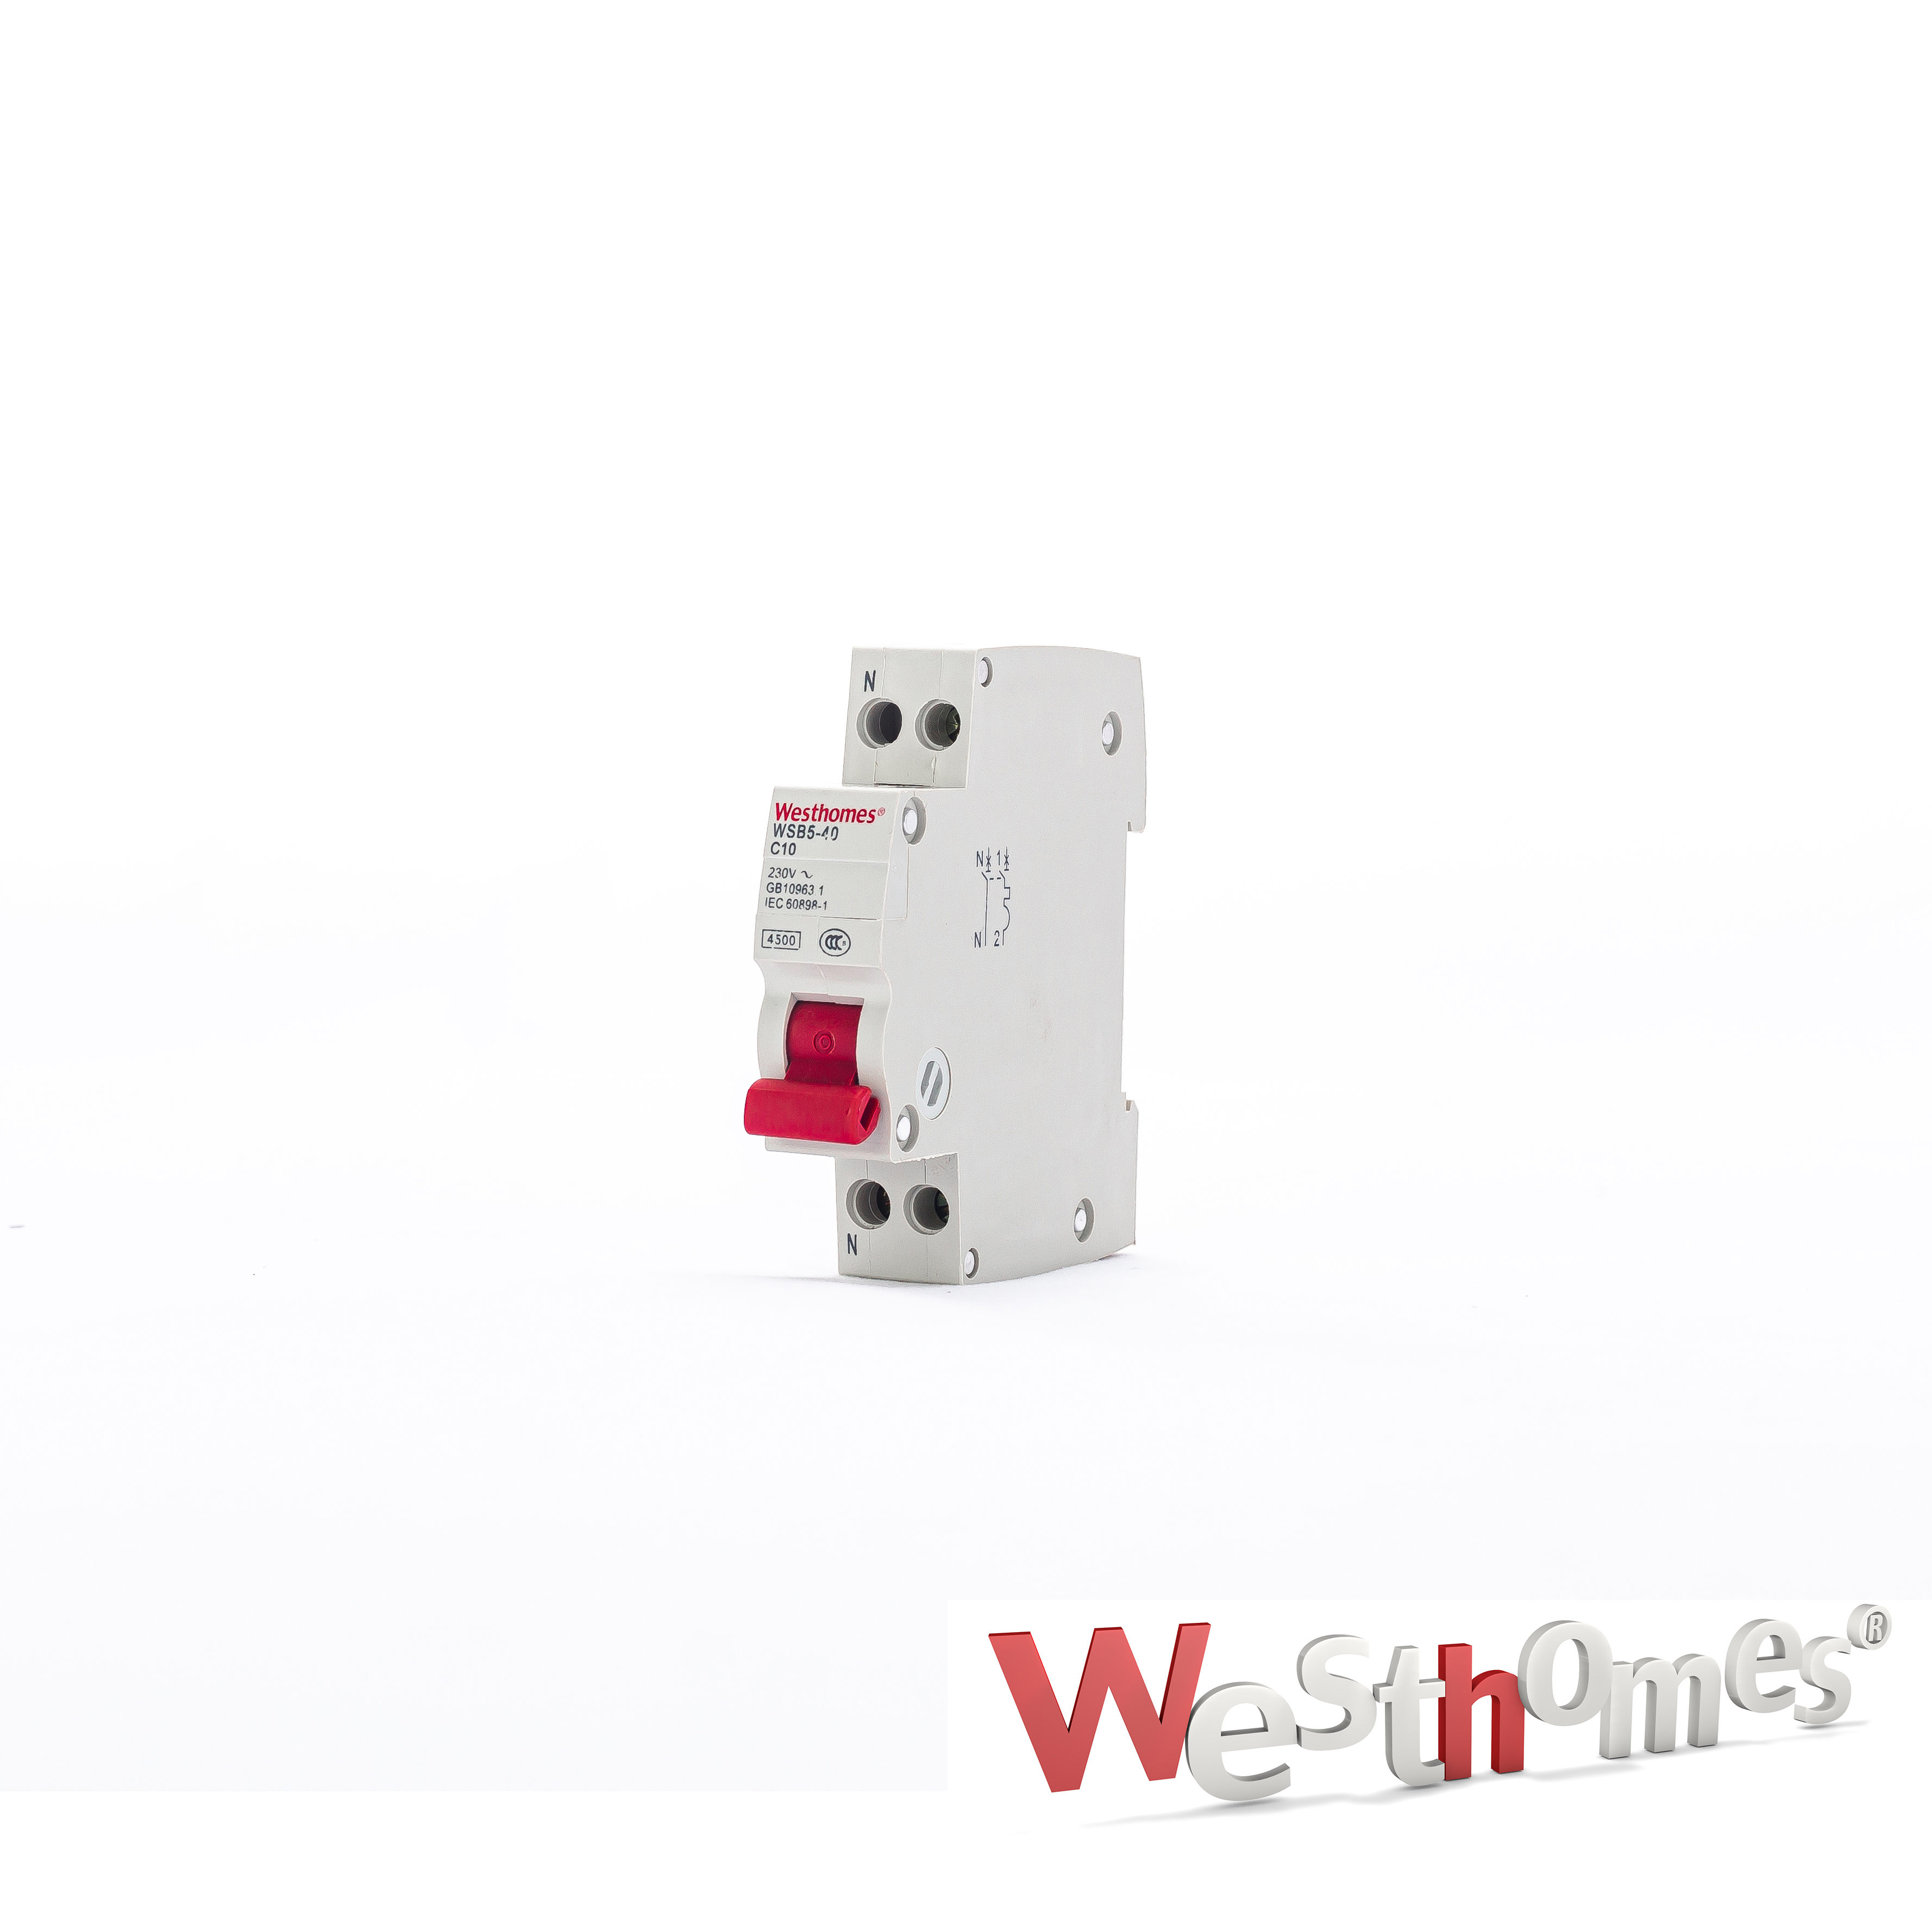 400V Low Voltage 3 pole isolating switch Moulded Case Circuit Breaker